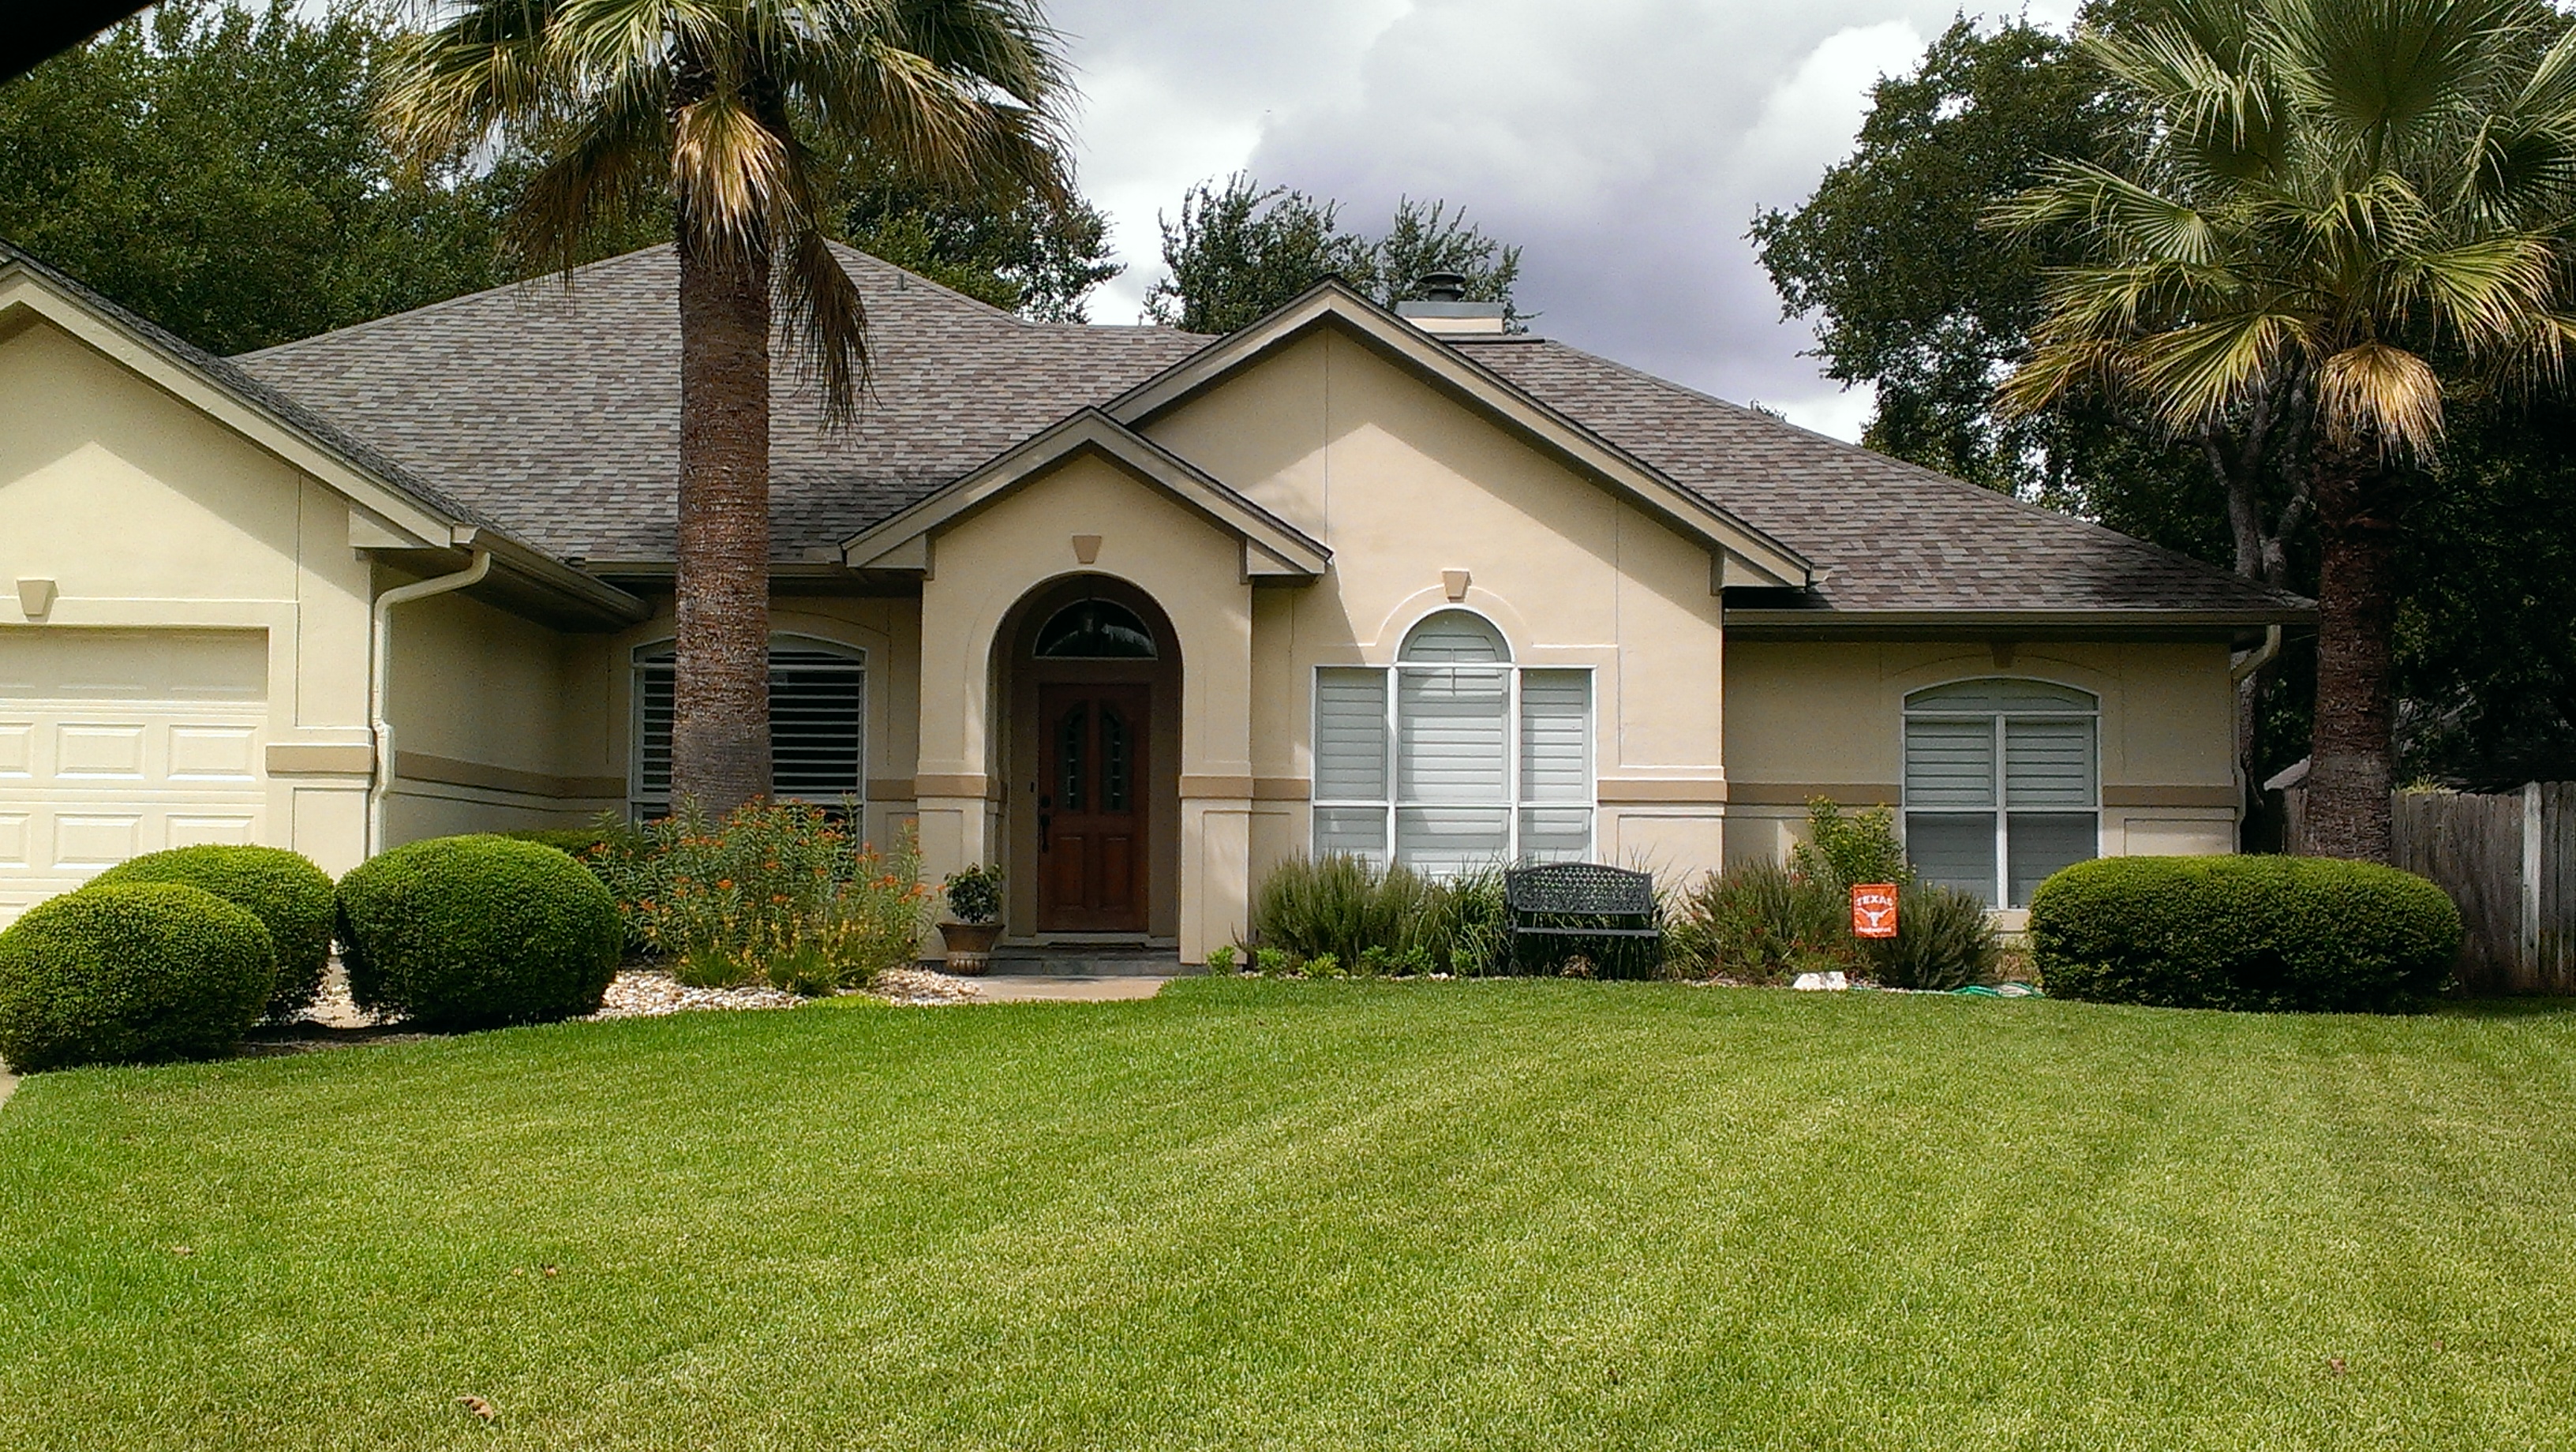 Exterior Painters in Georgetown, TX by CertaPro Painters